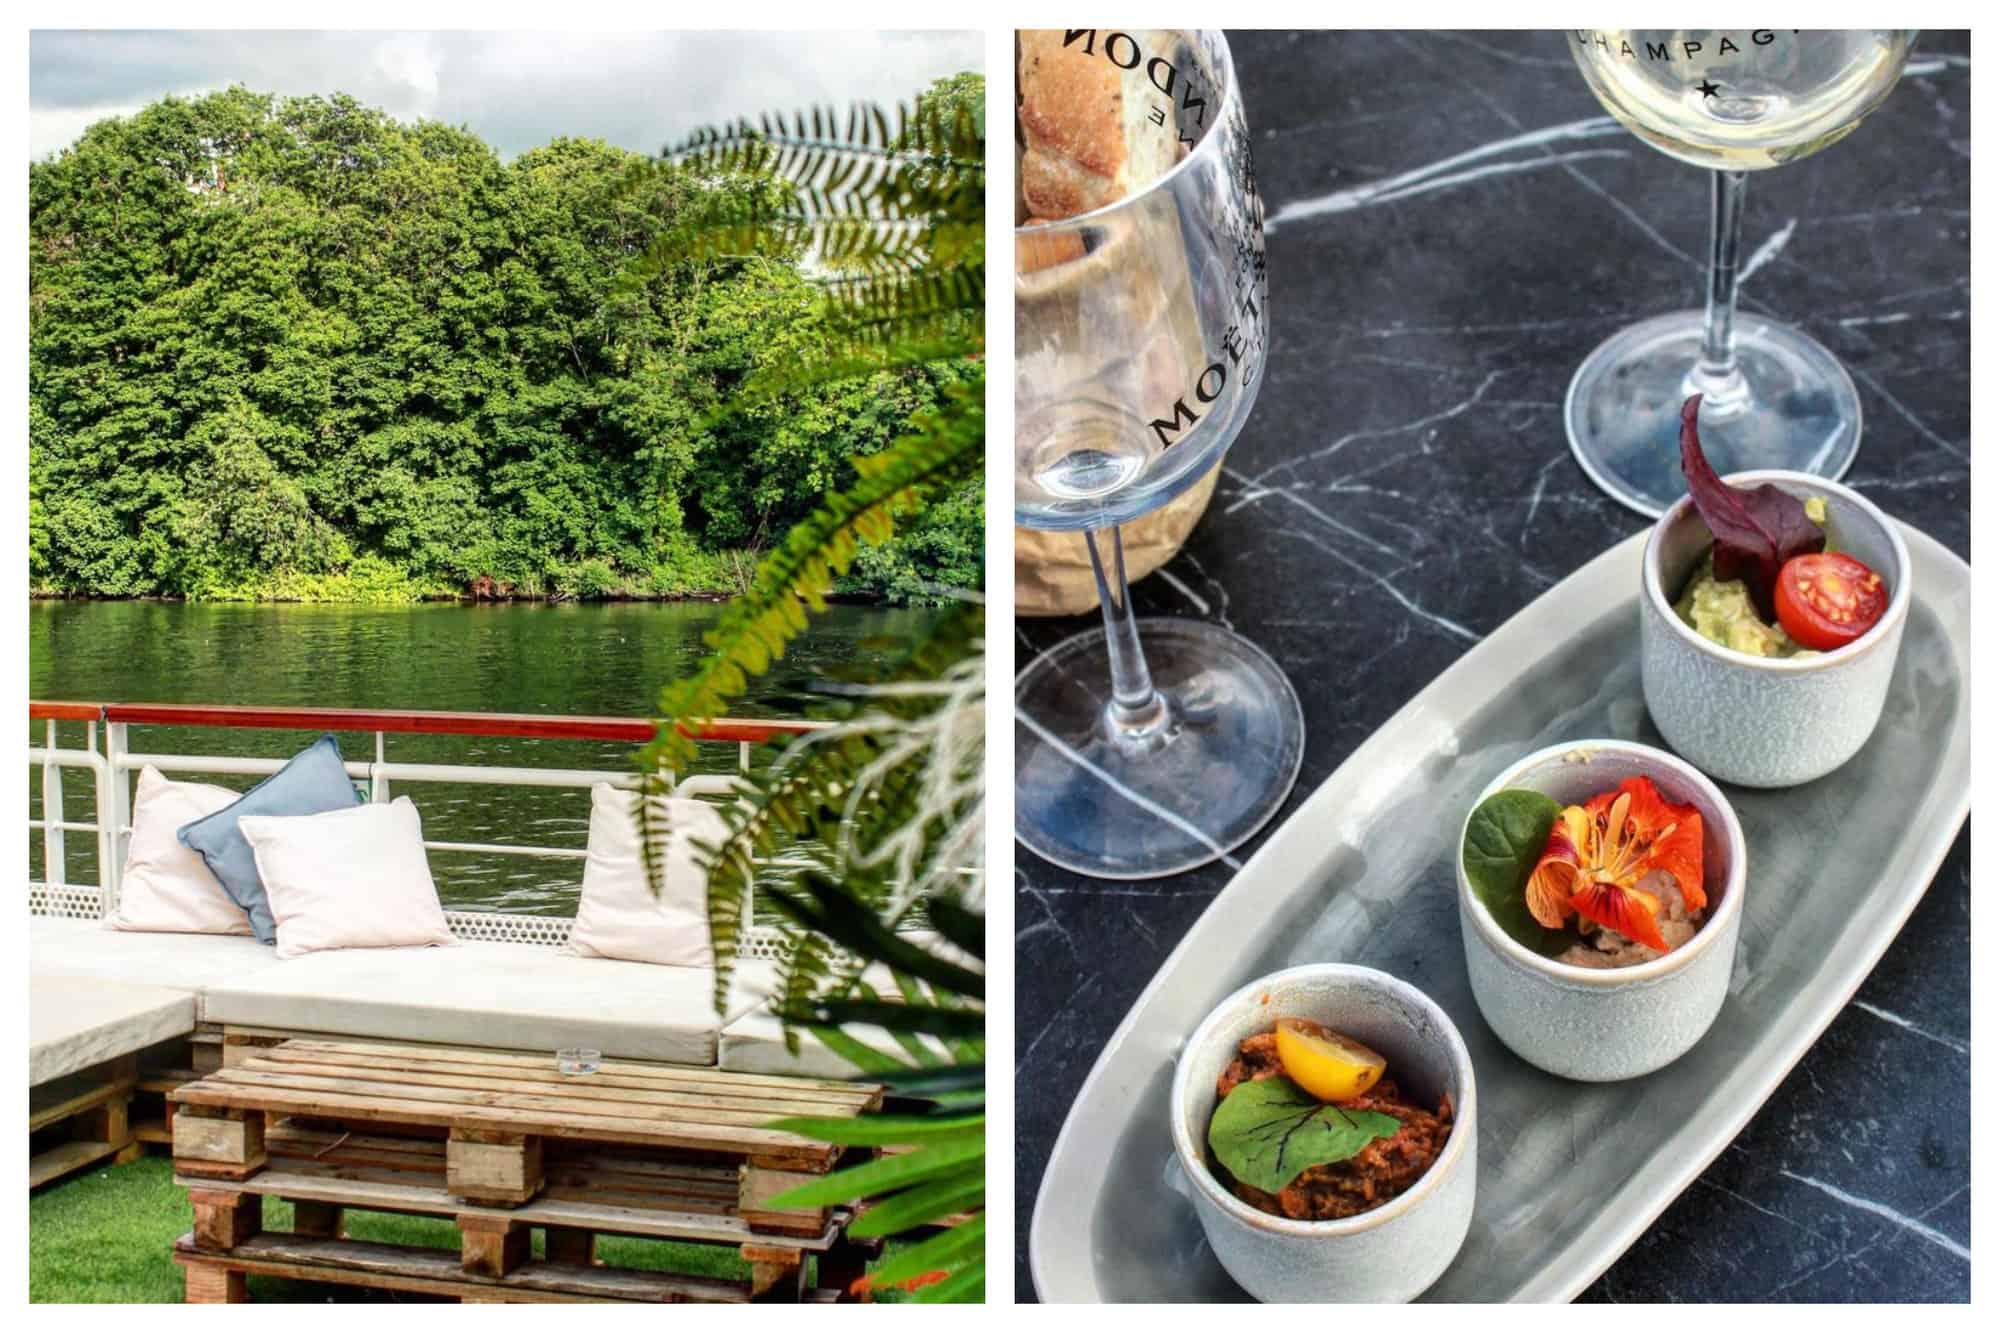 Left: a picture of an outdoor white couch with white cushions along the Seine river in Paris. Right: a picture of two glasses of white wine with a small plate of tapas.